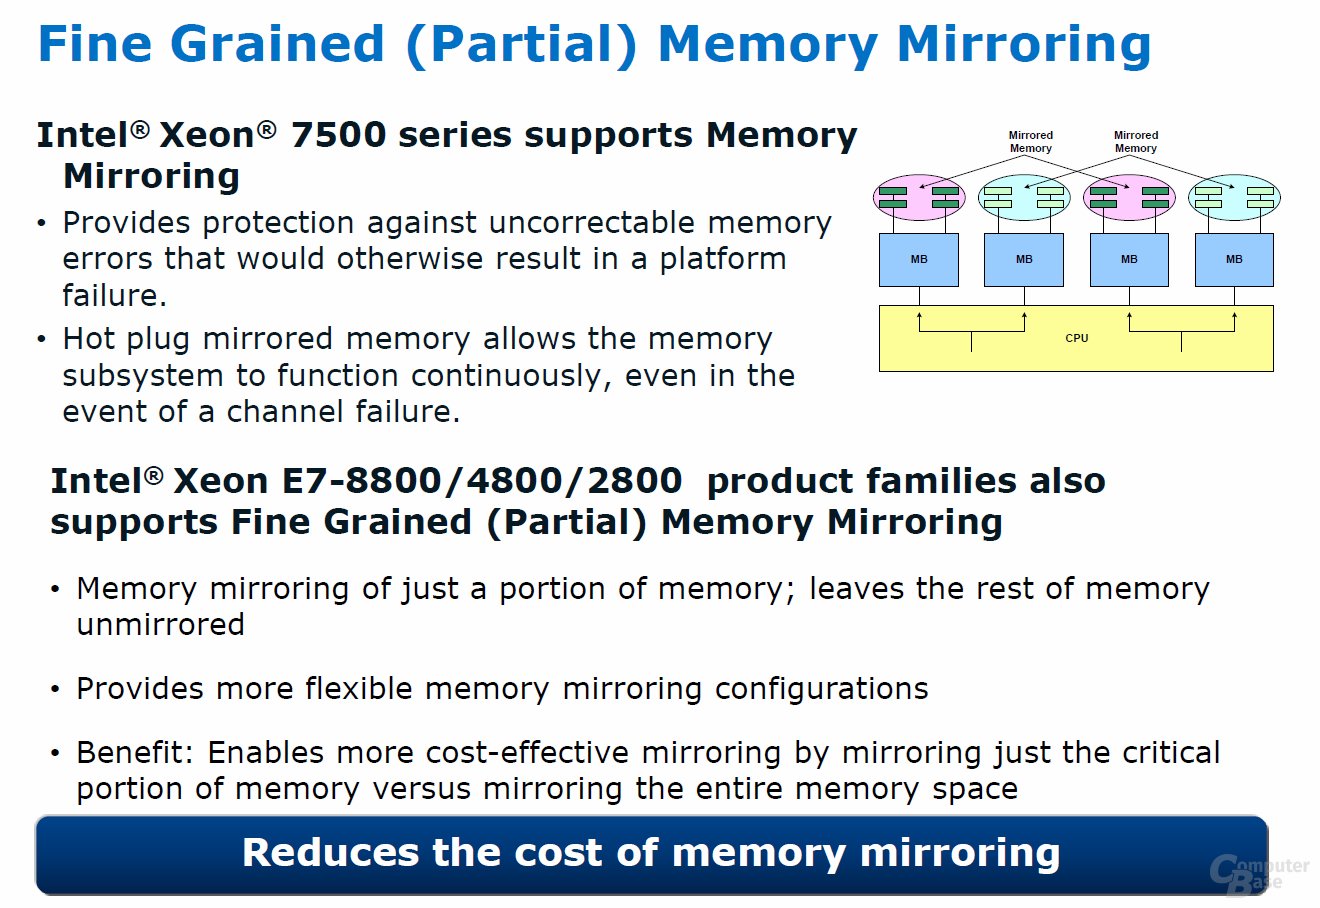 Fine Grained (Partial) Memory Mirroring